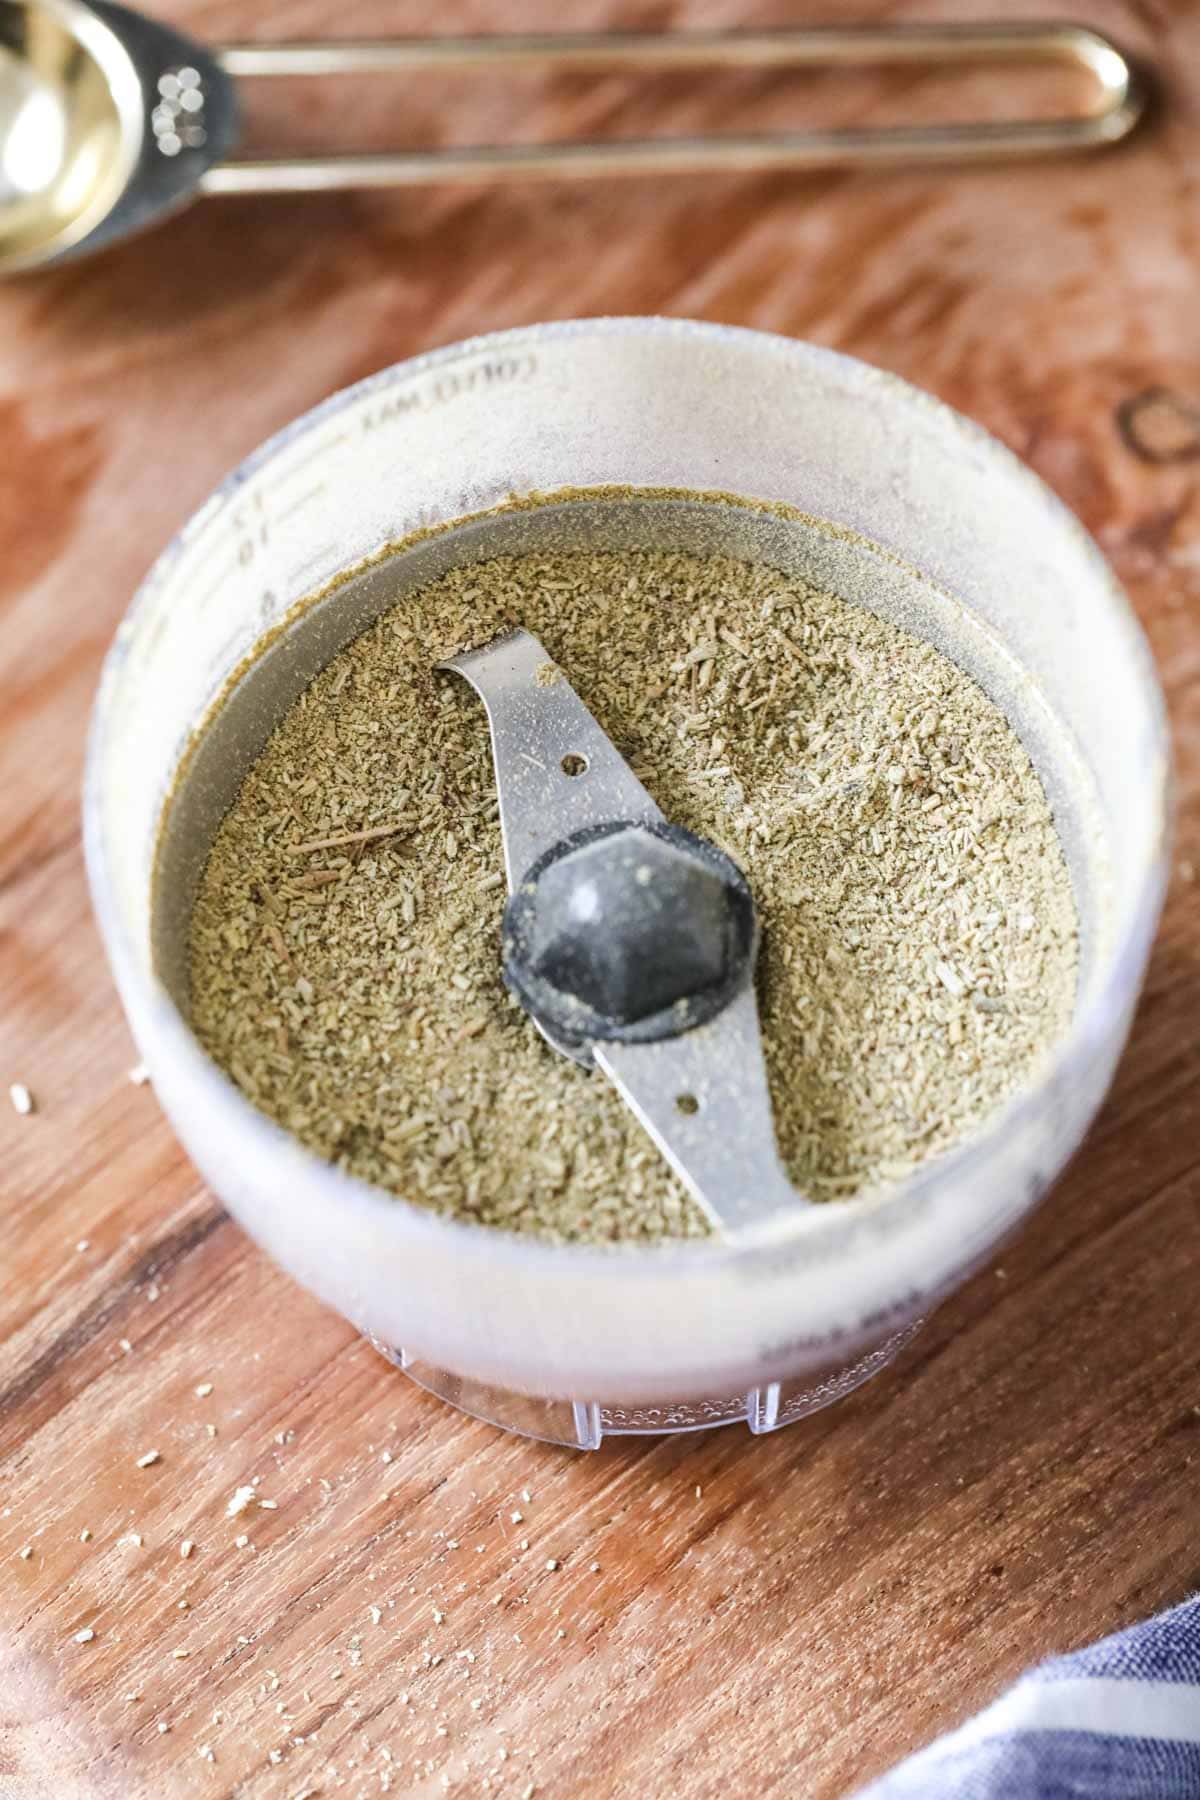 Overhead view of a mini food processor that's been used to grind herbs into powder.